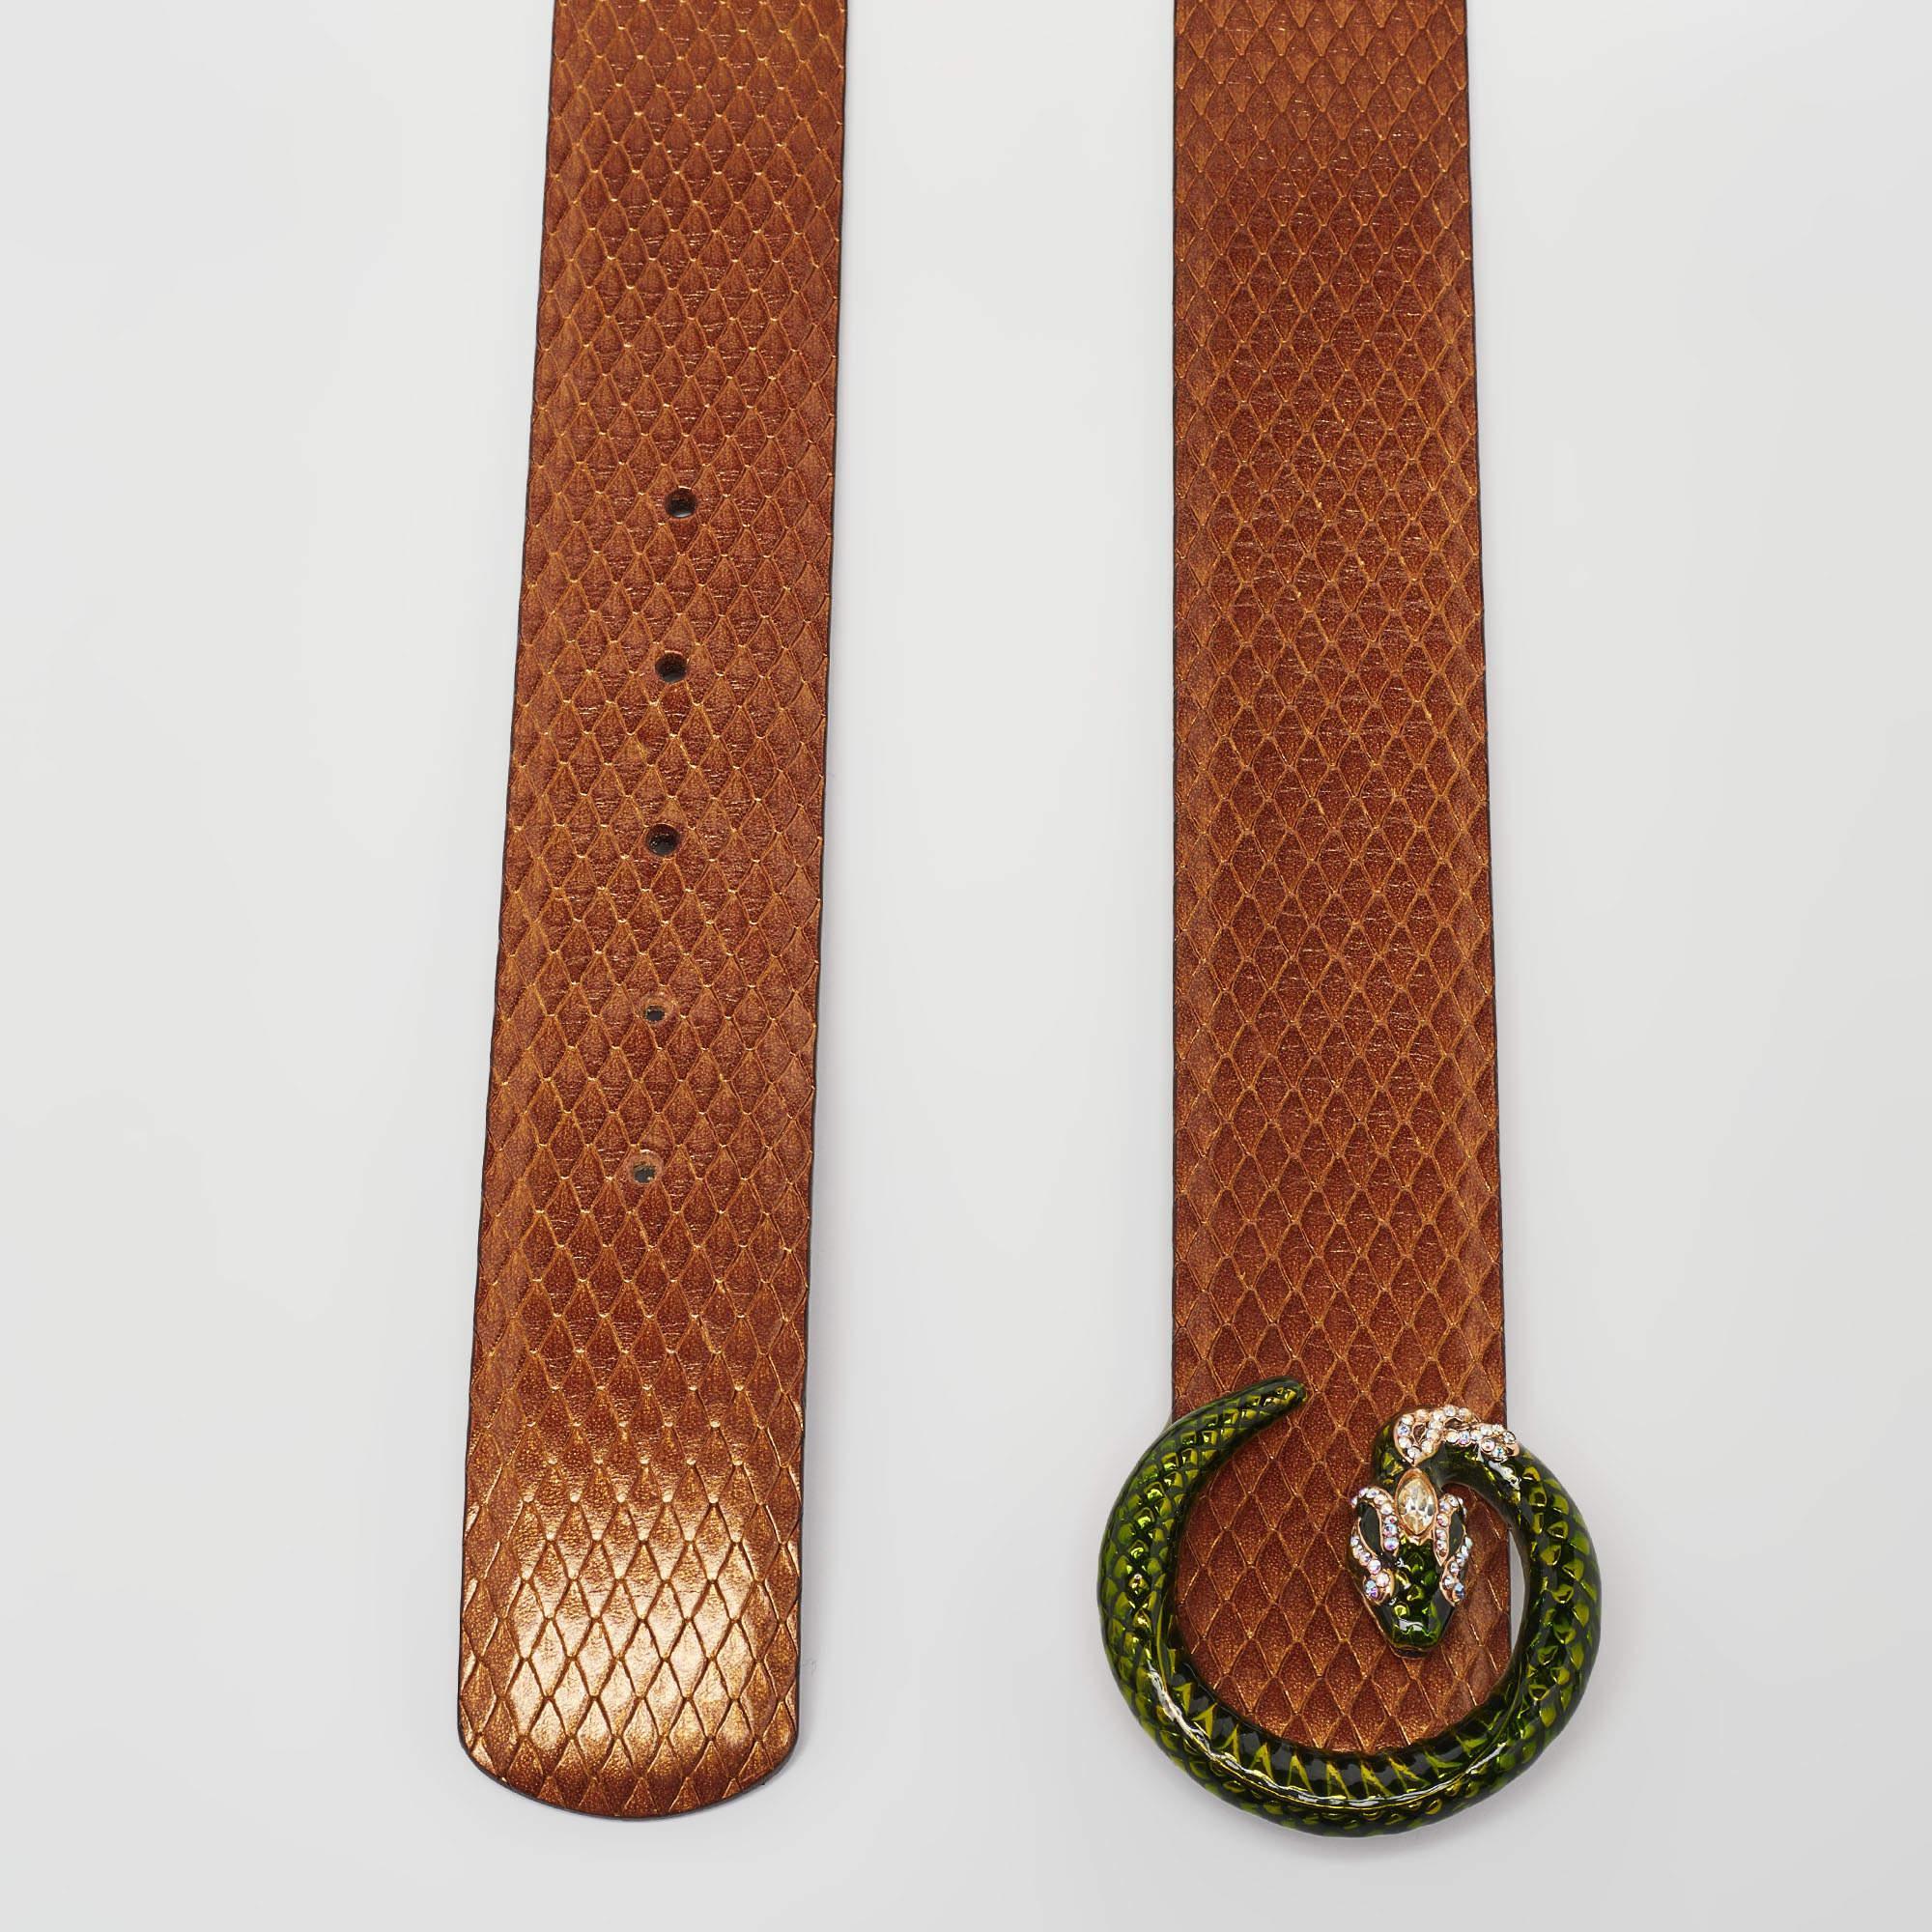 Elevate your style quotient with this Gucci belt. Crafted to perfection, it exudes sophistication and luxury, making it the ultimate accessory for those who demand both quality and fashion.

